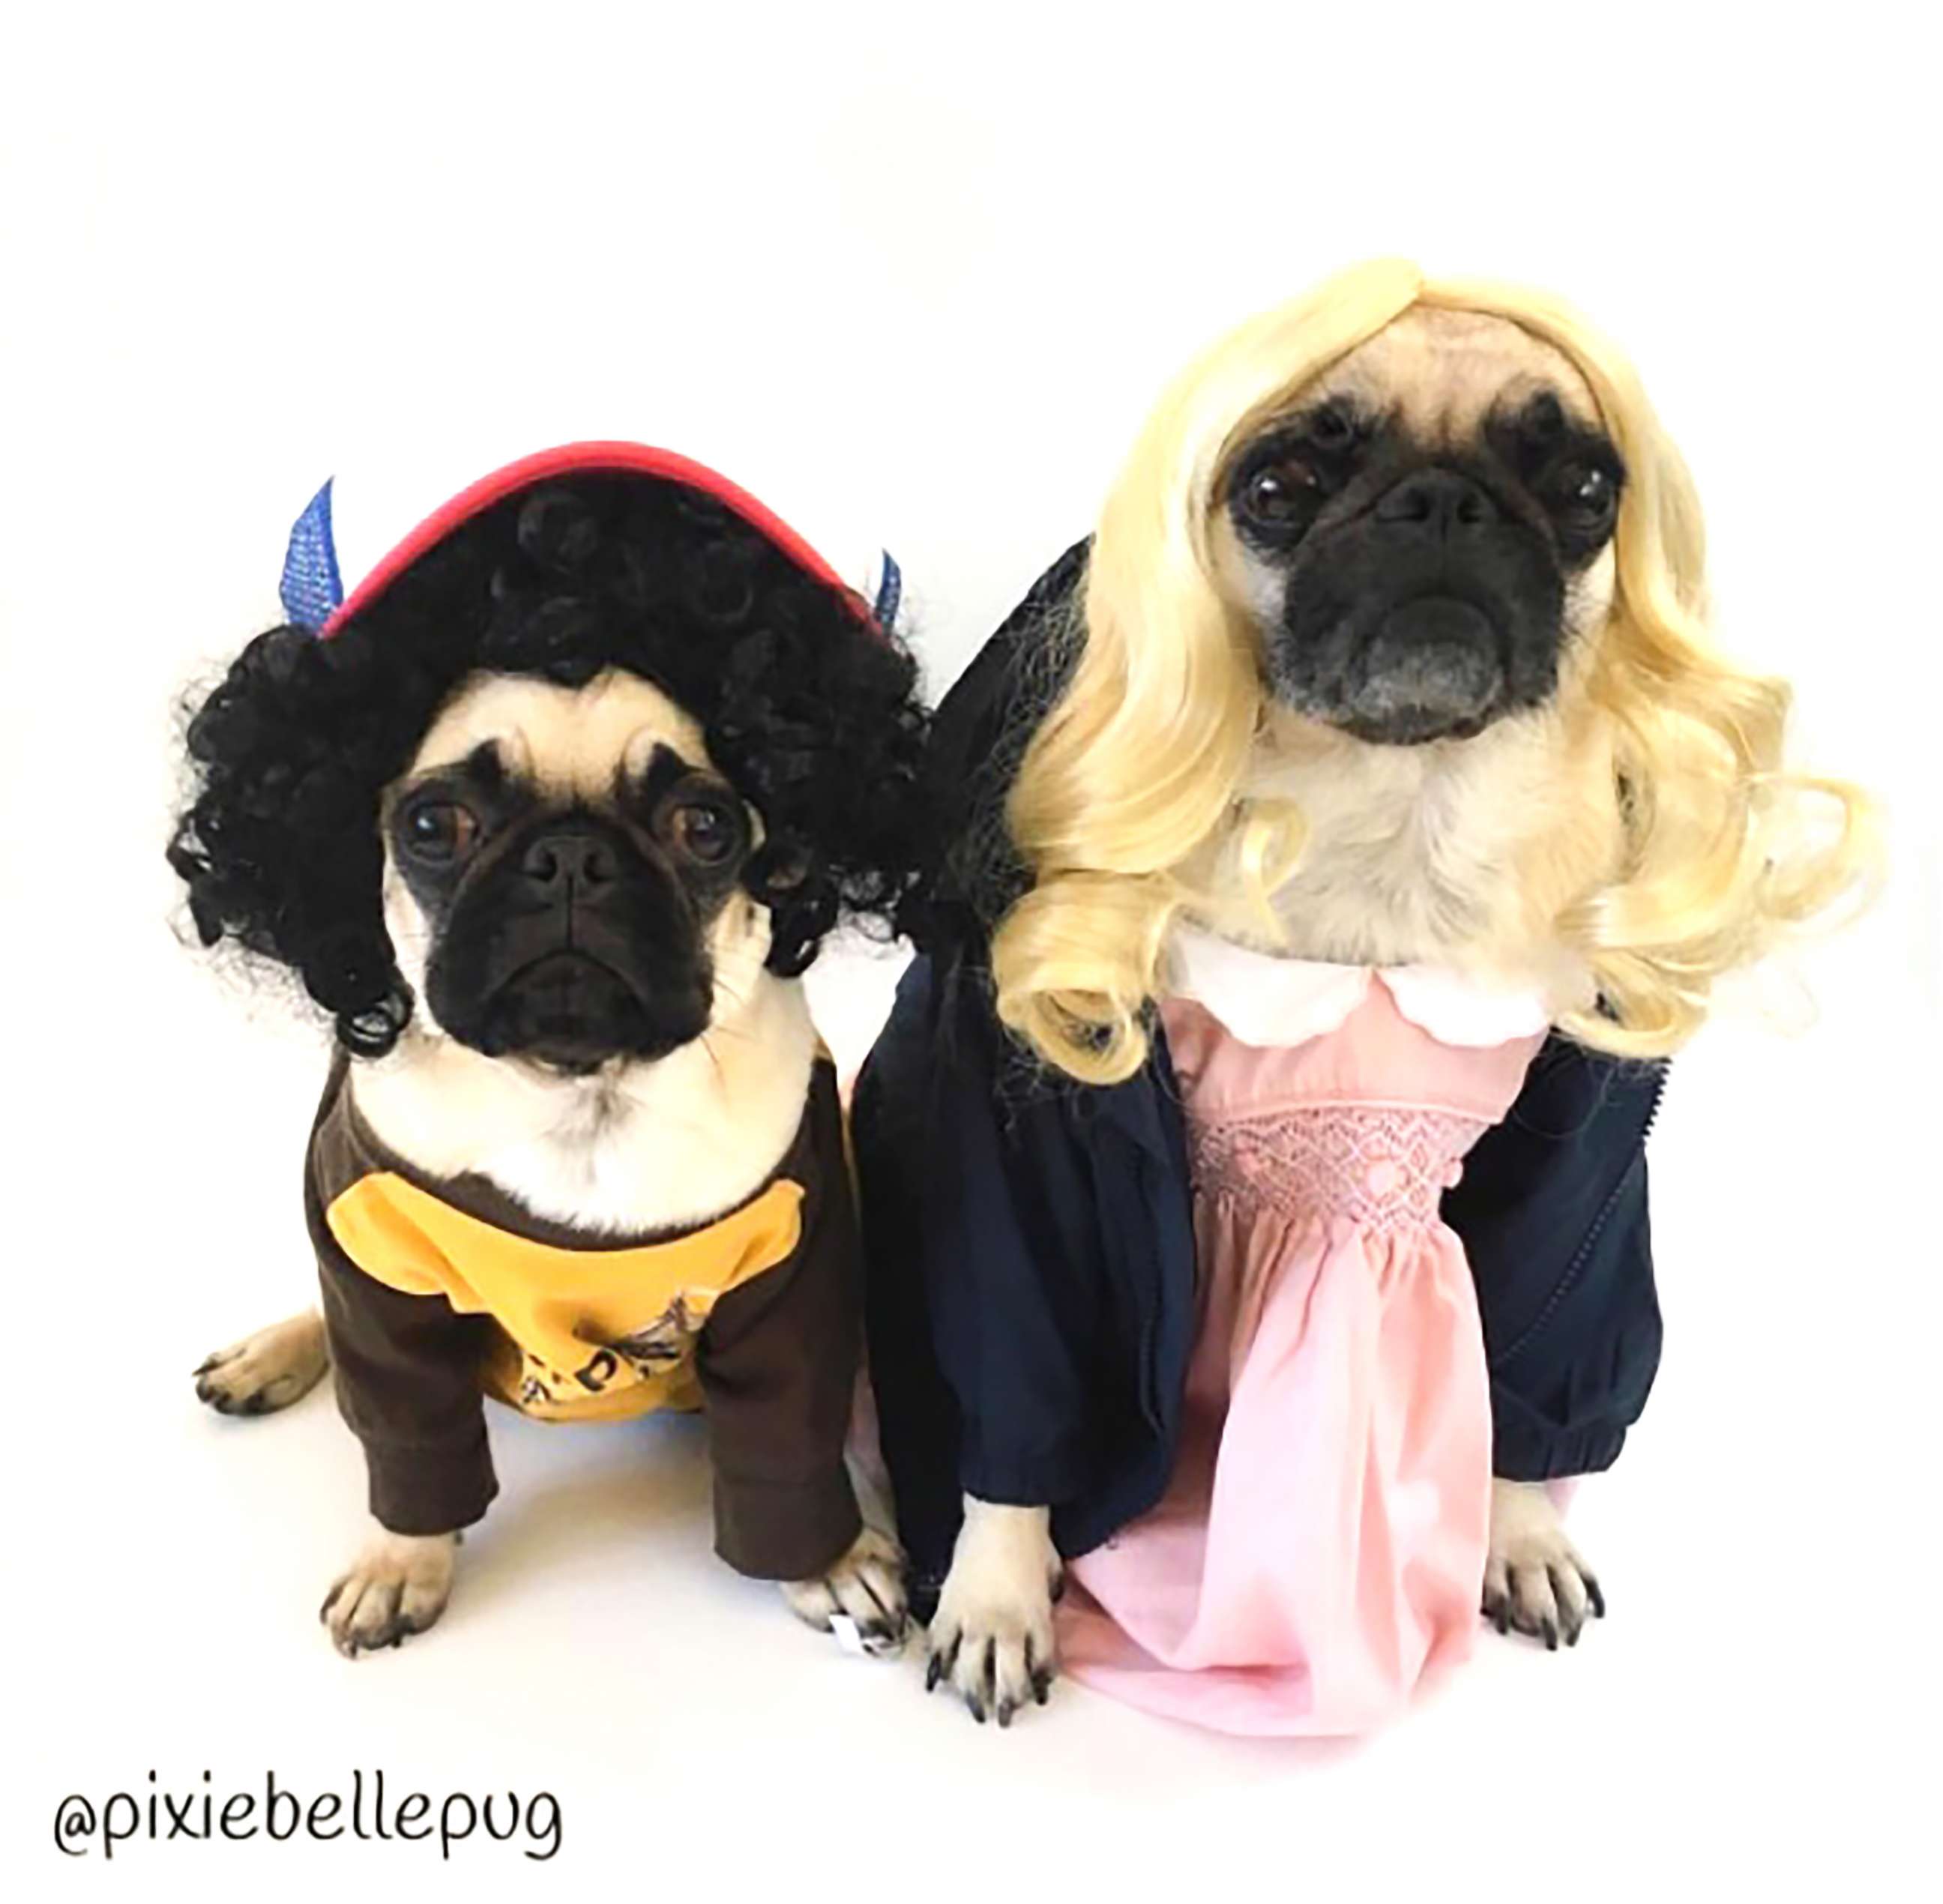 PHOTO: Susan Schumacher, owner of the Instagram account, pixiebellepug, dressed her pugs CharlieRose and Lulubee as Mike and Eleven from the series "Stranger Things.